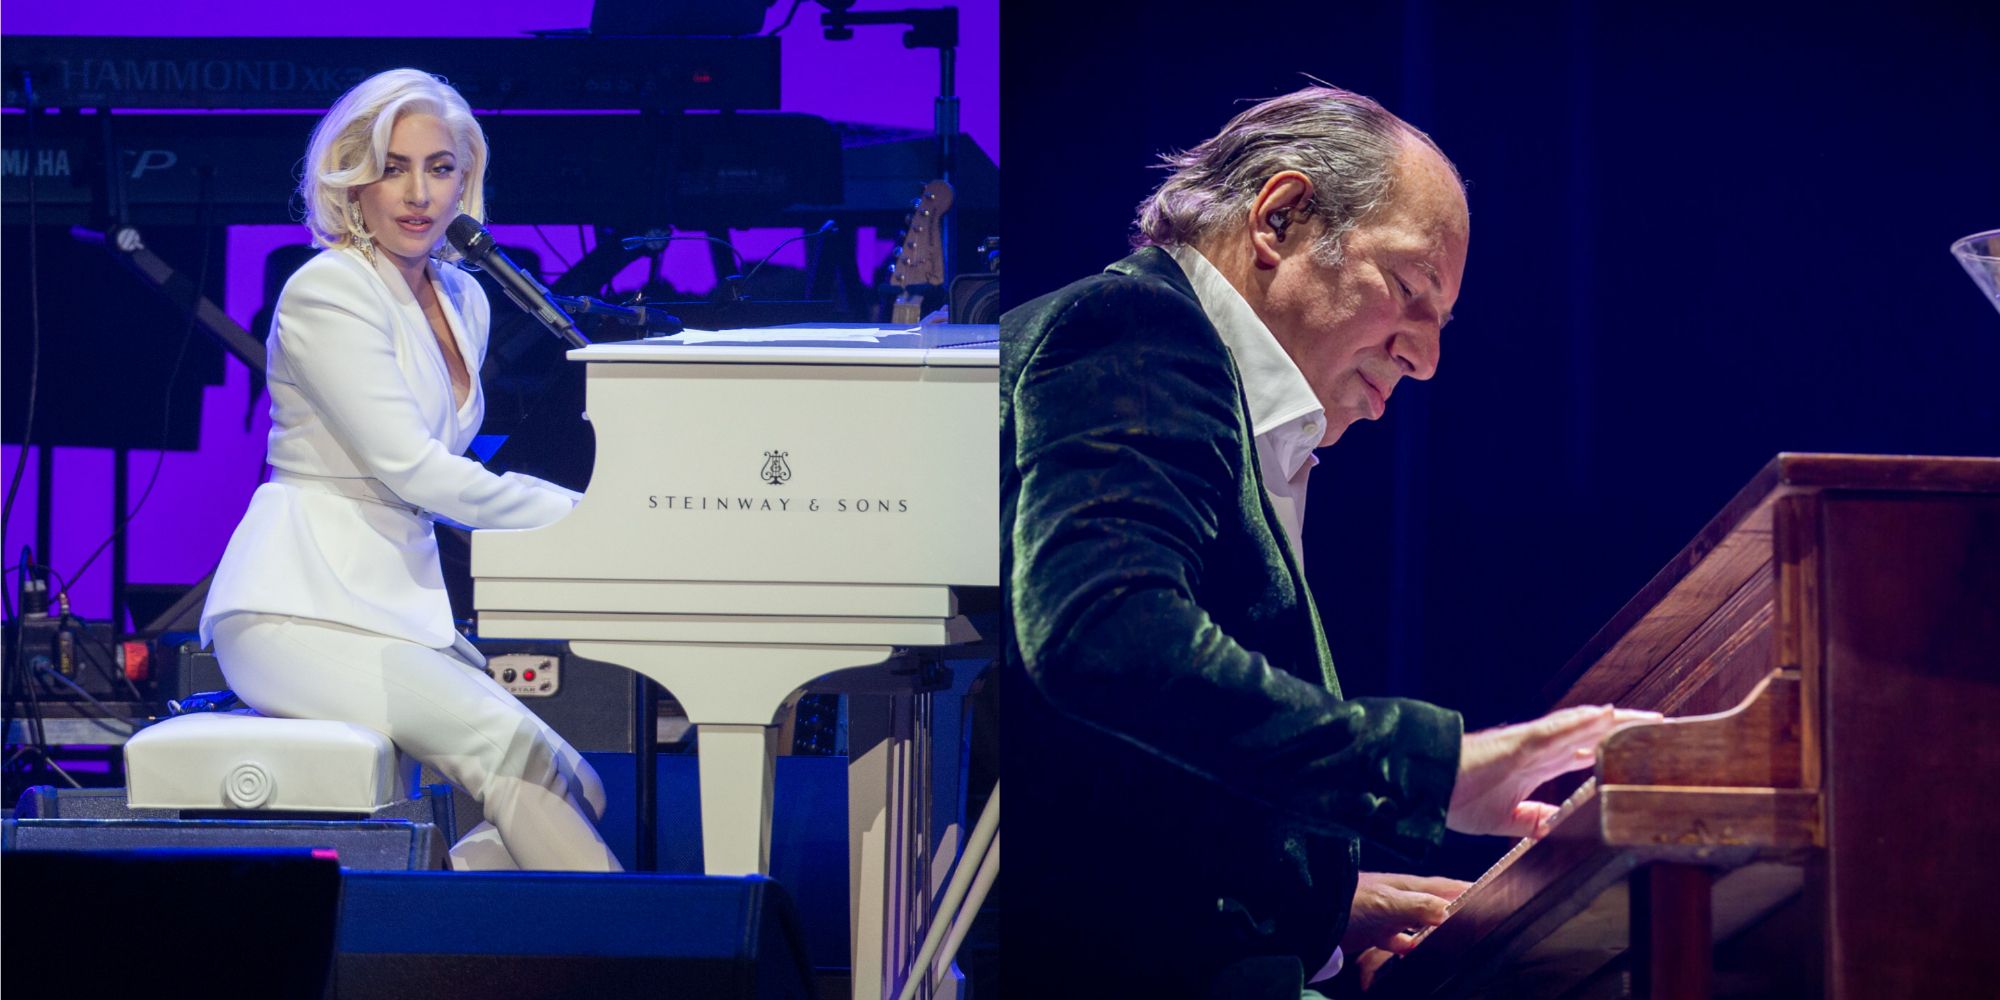 Lady Gaga and Hans Zimmer playing the piano